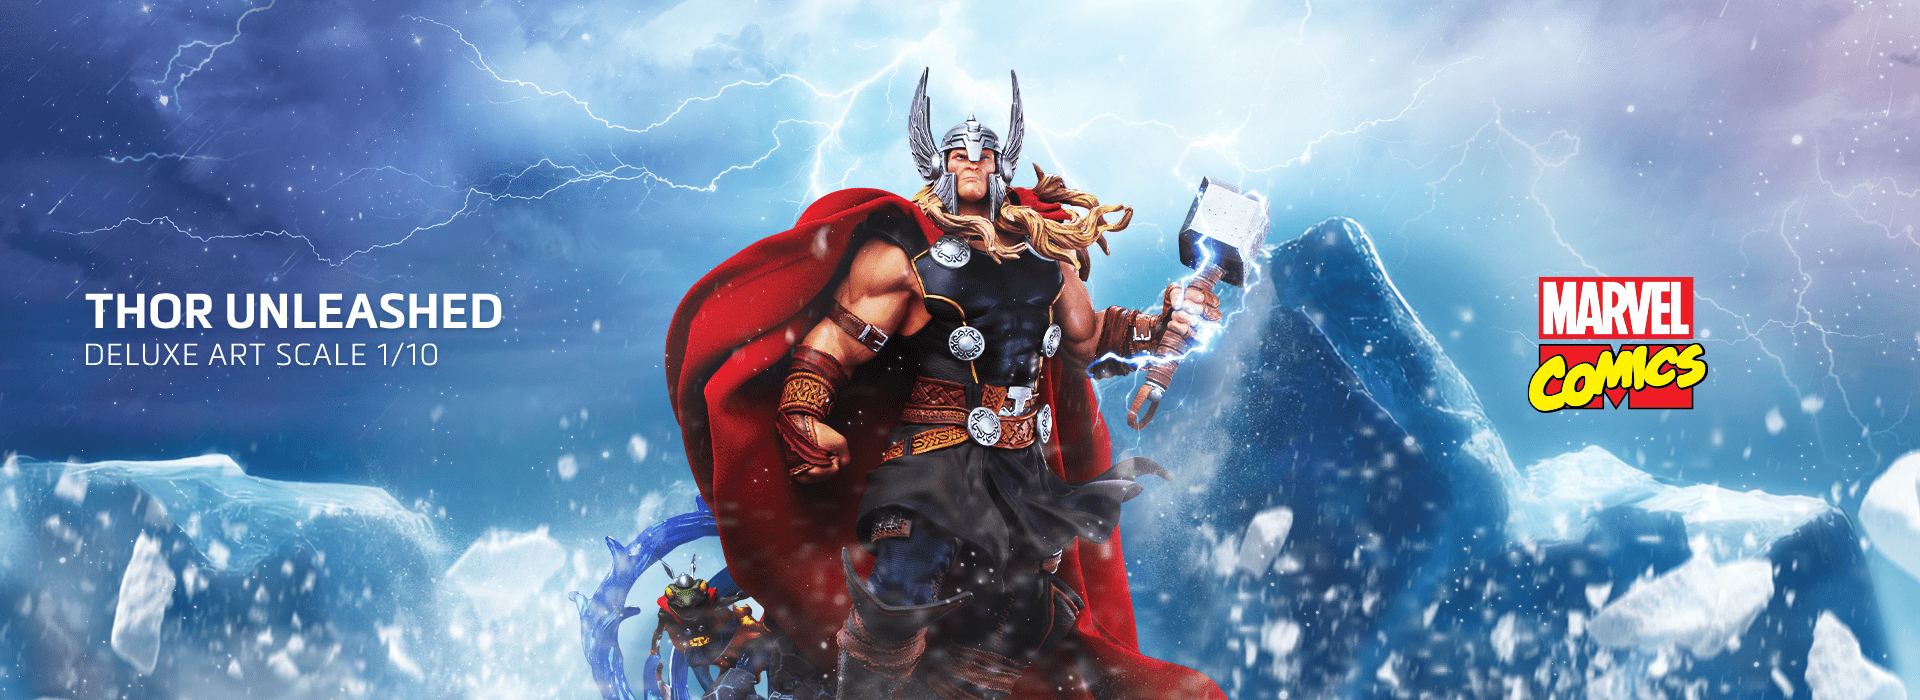 Thor Unleashed Deluxe - Marvel Comics - Art Scale 1/10